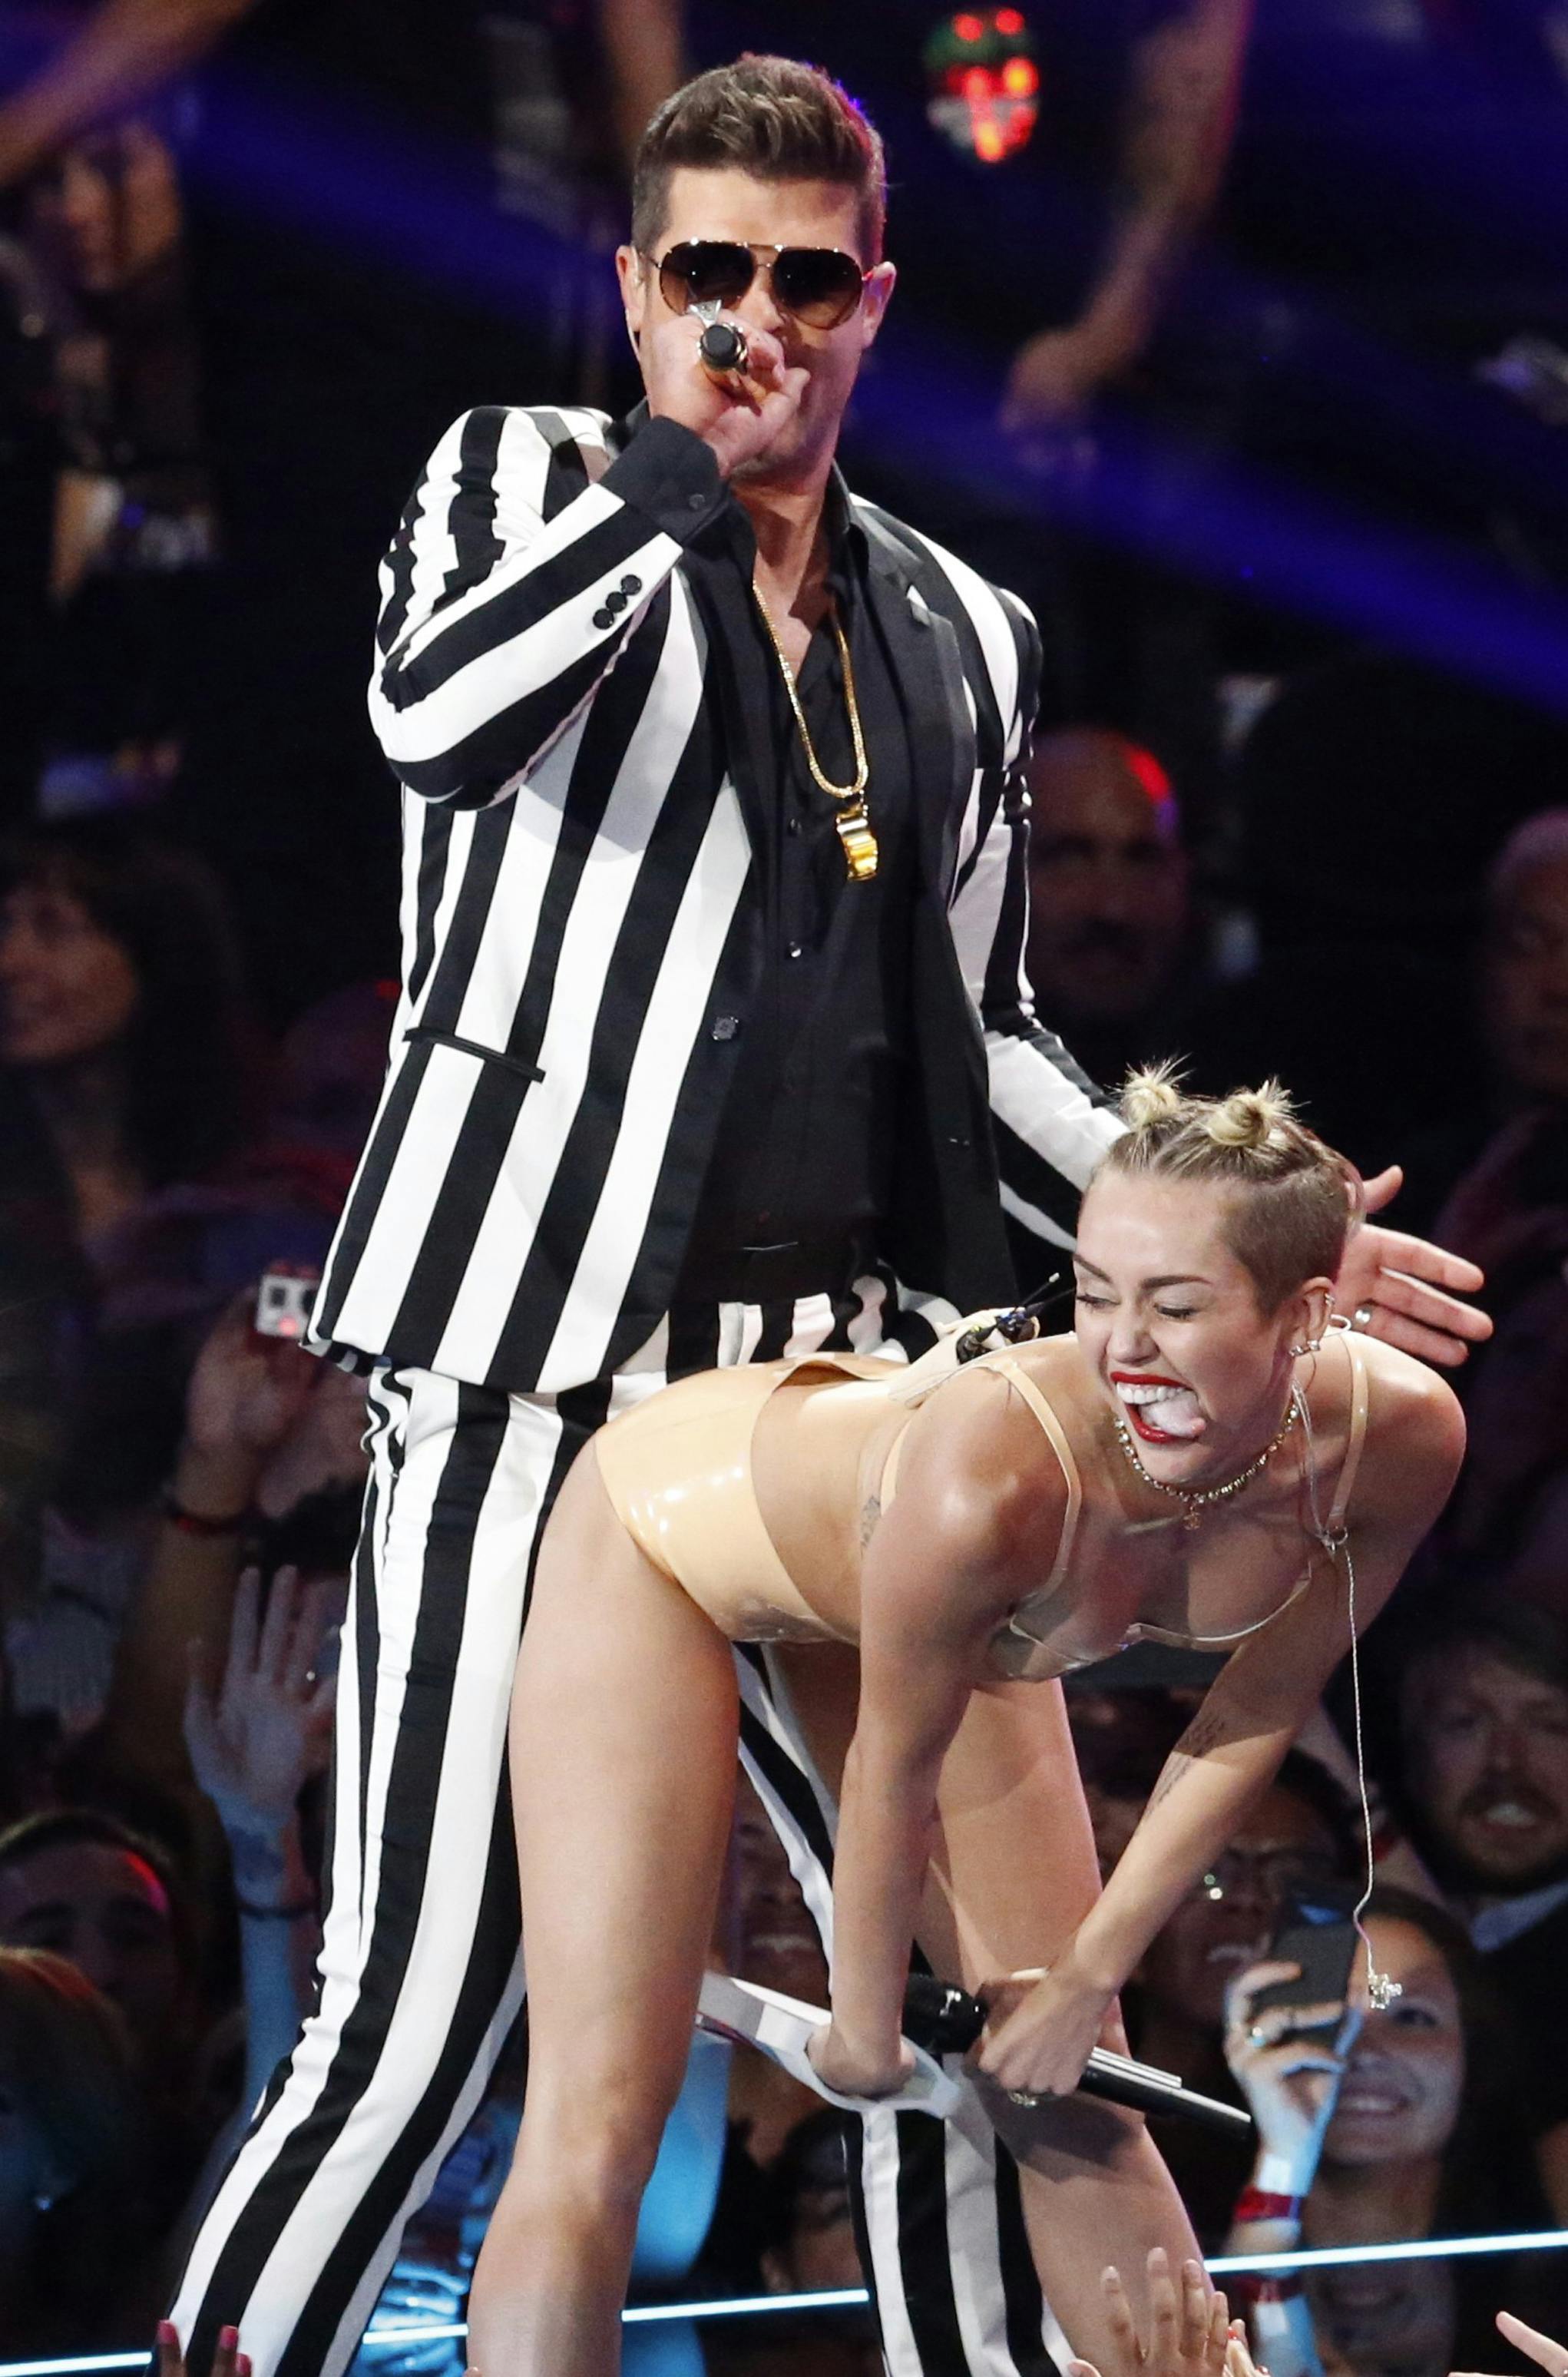 Miley Cyrus and Robin Thicke perform "Blurred Lines" during the 2013 MTV Video Music Awards in New York August 25, 2013. REUTERS/Lucas Jackson (UNITED STATES - Tags: ENTERTAINMENT) (MTV-SHOW)